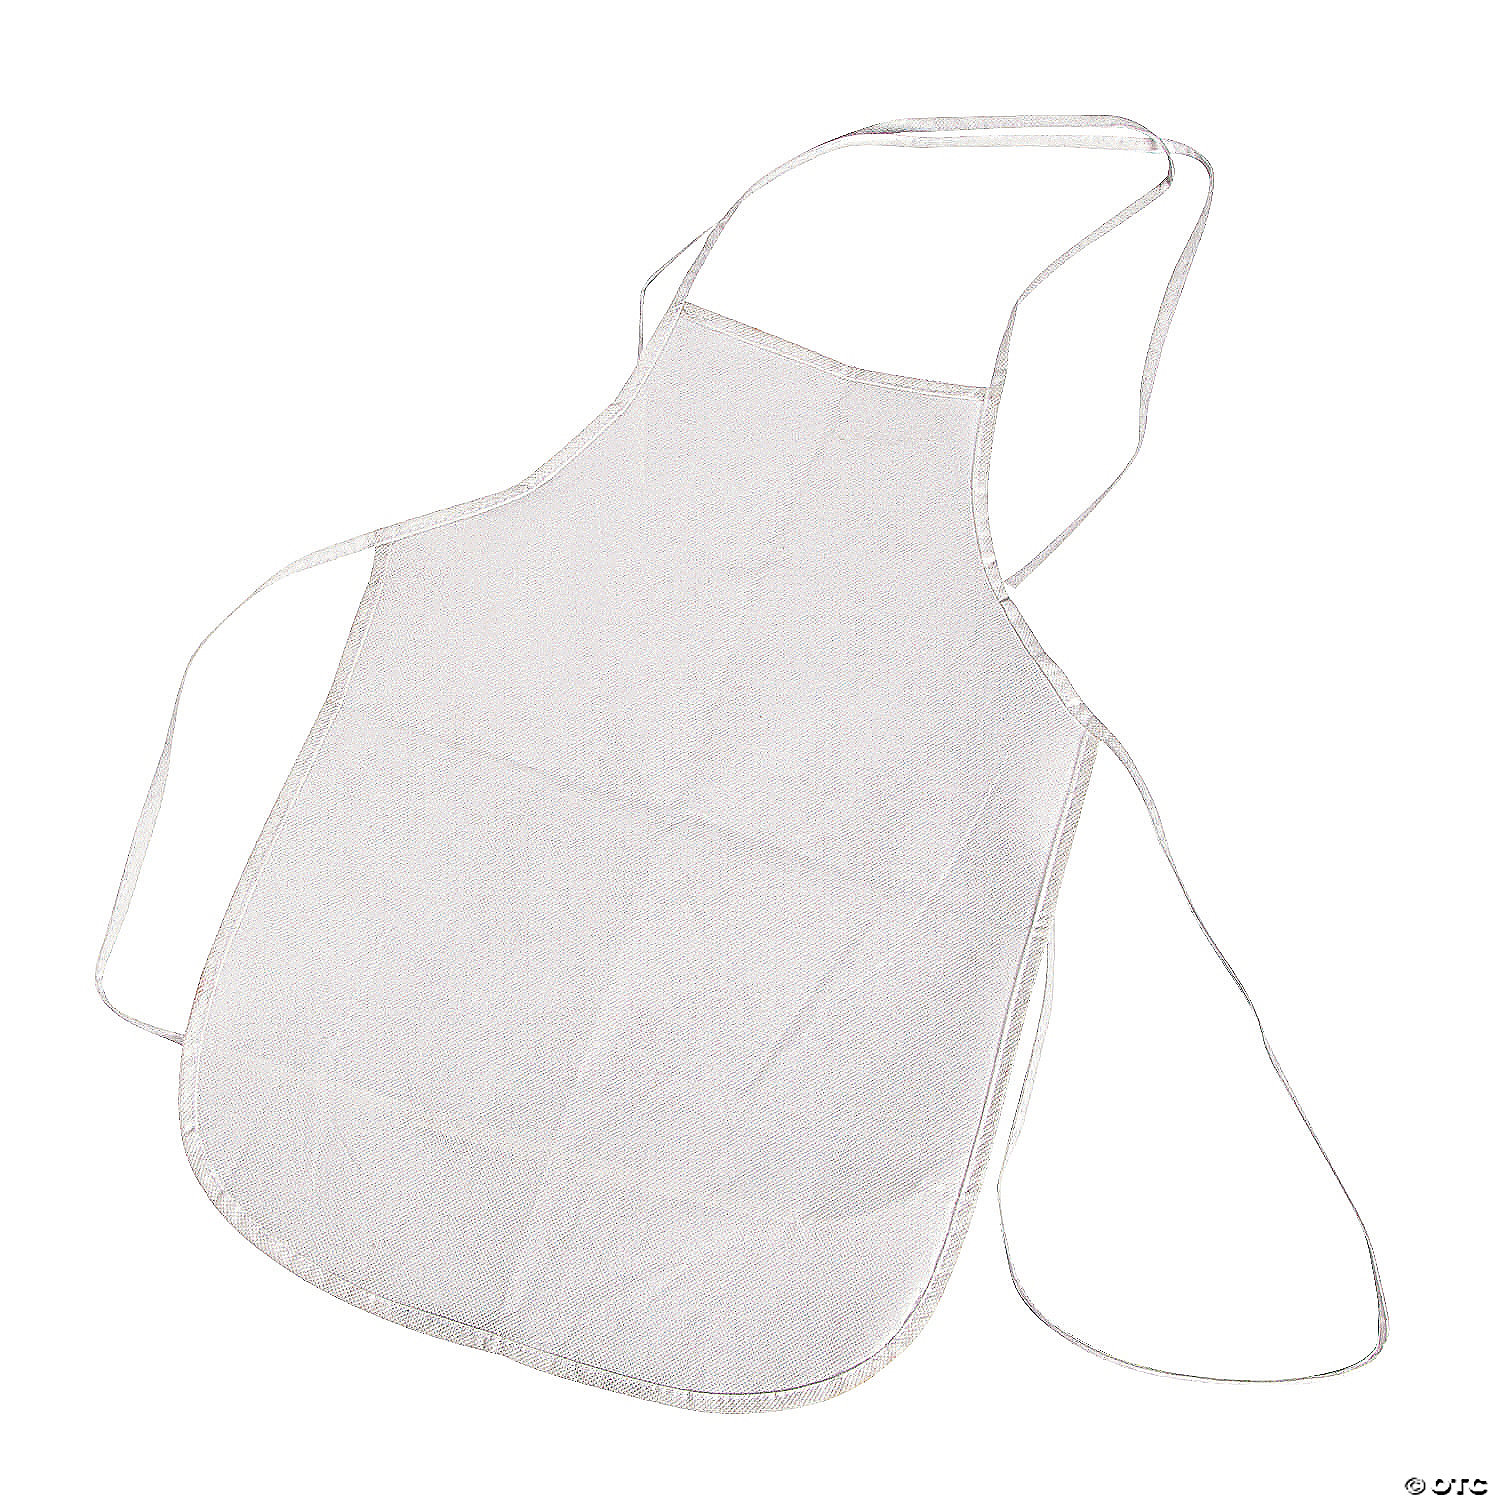 12 White CHILD SIZED APRONS arts crafts DIY cooking classroom kid children APRON 